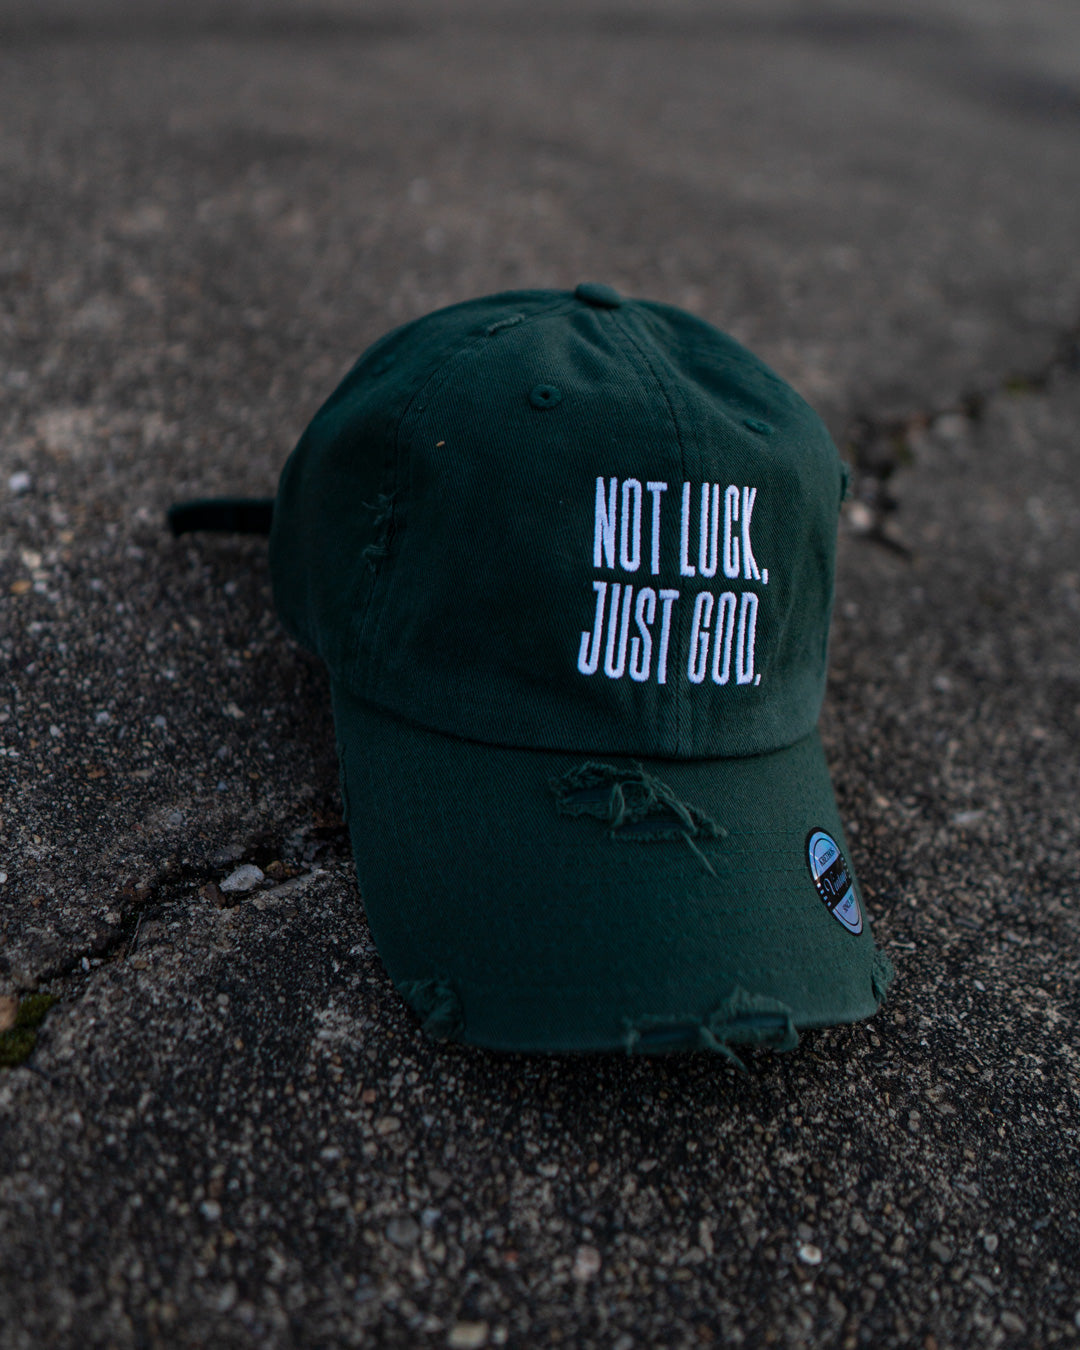 Not Luck, Just God. Hat (Distressed)